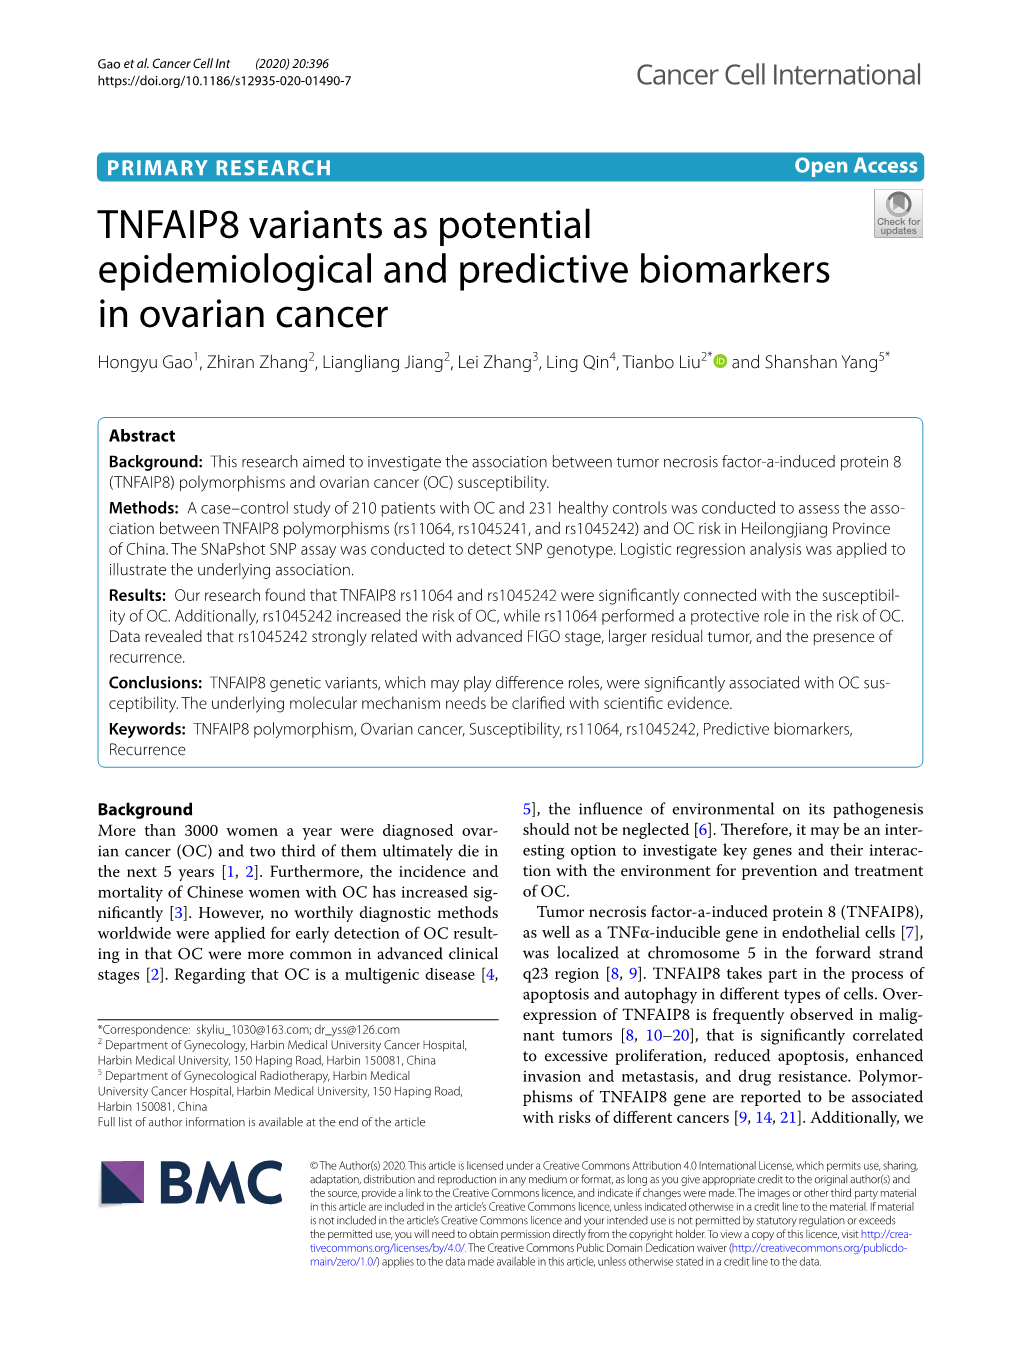 TNFAIP8 Variants As Potential Epidemiological and Predictive Biomarkers in Ovarian Cancer